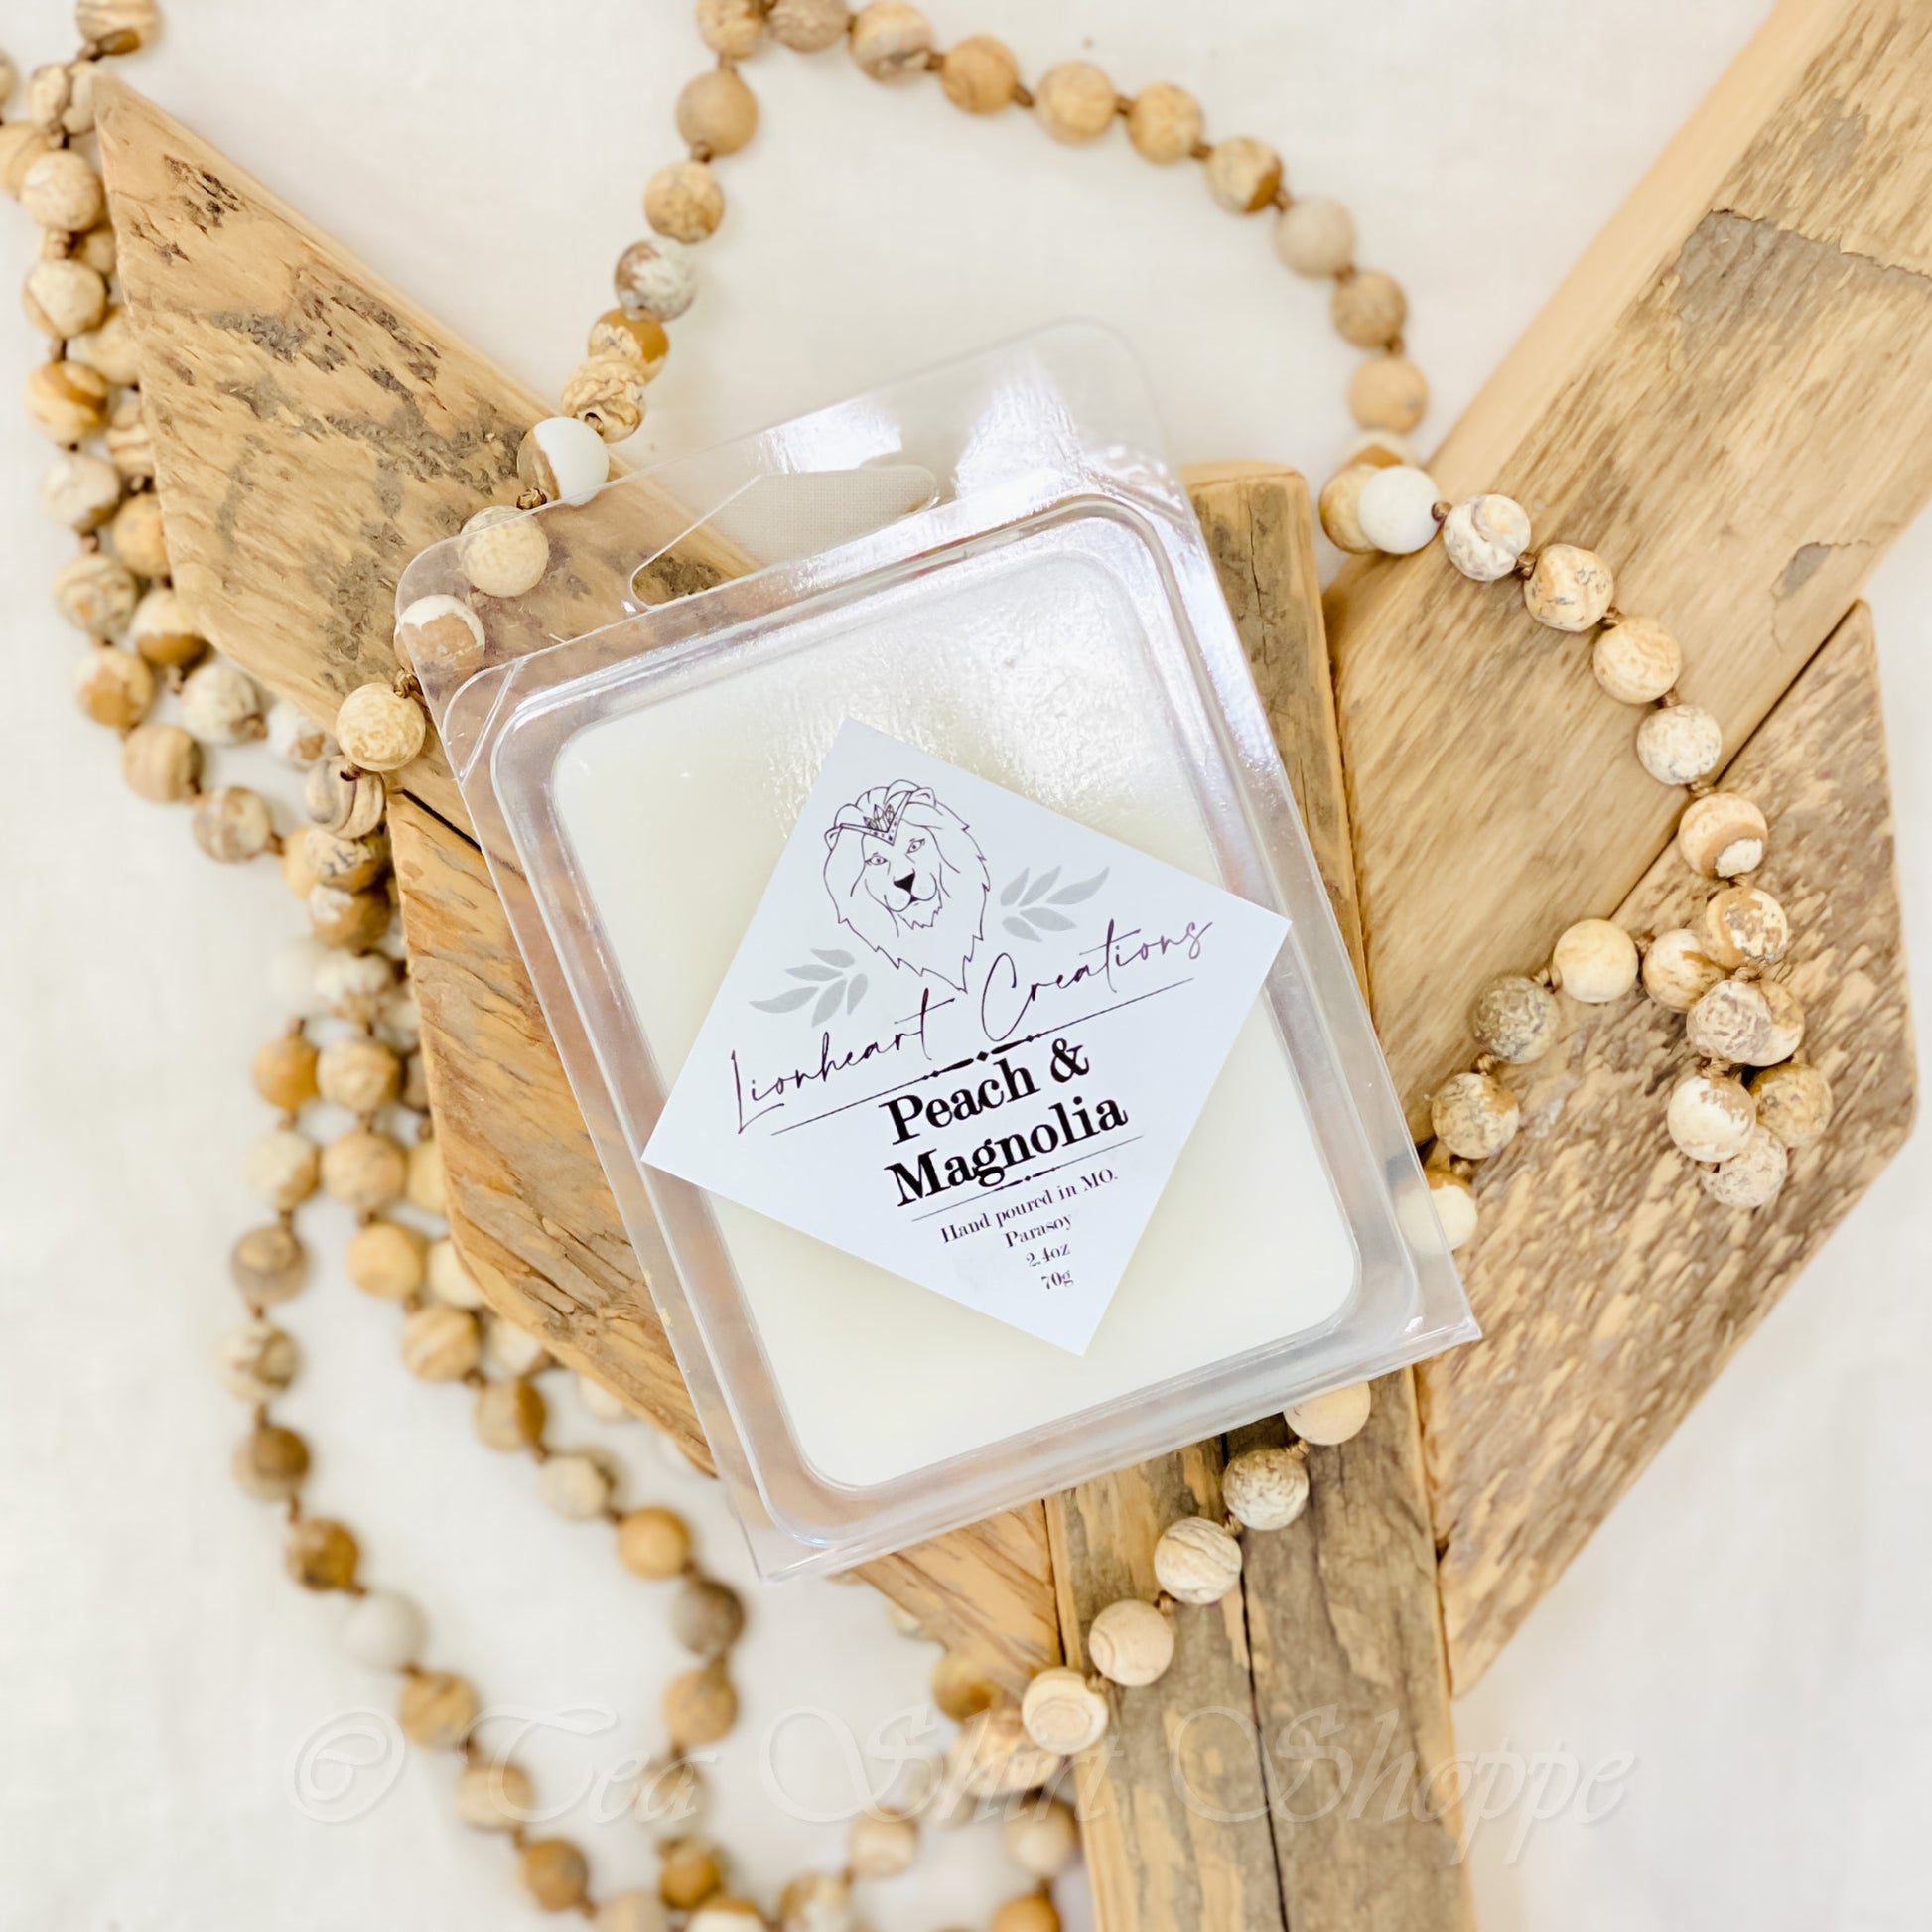 Welcome to the paradise of Peach & Magnolia Scented Wax Melt! Our wax melt will fill your home with a sensational treat - the perfect combination of fresh citrus and magnolia.